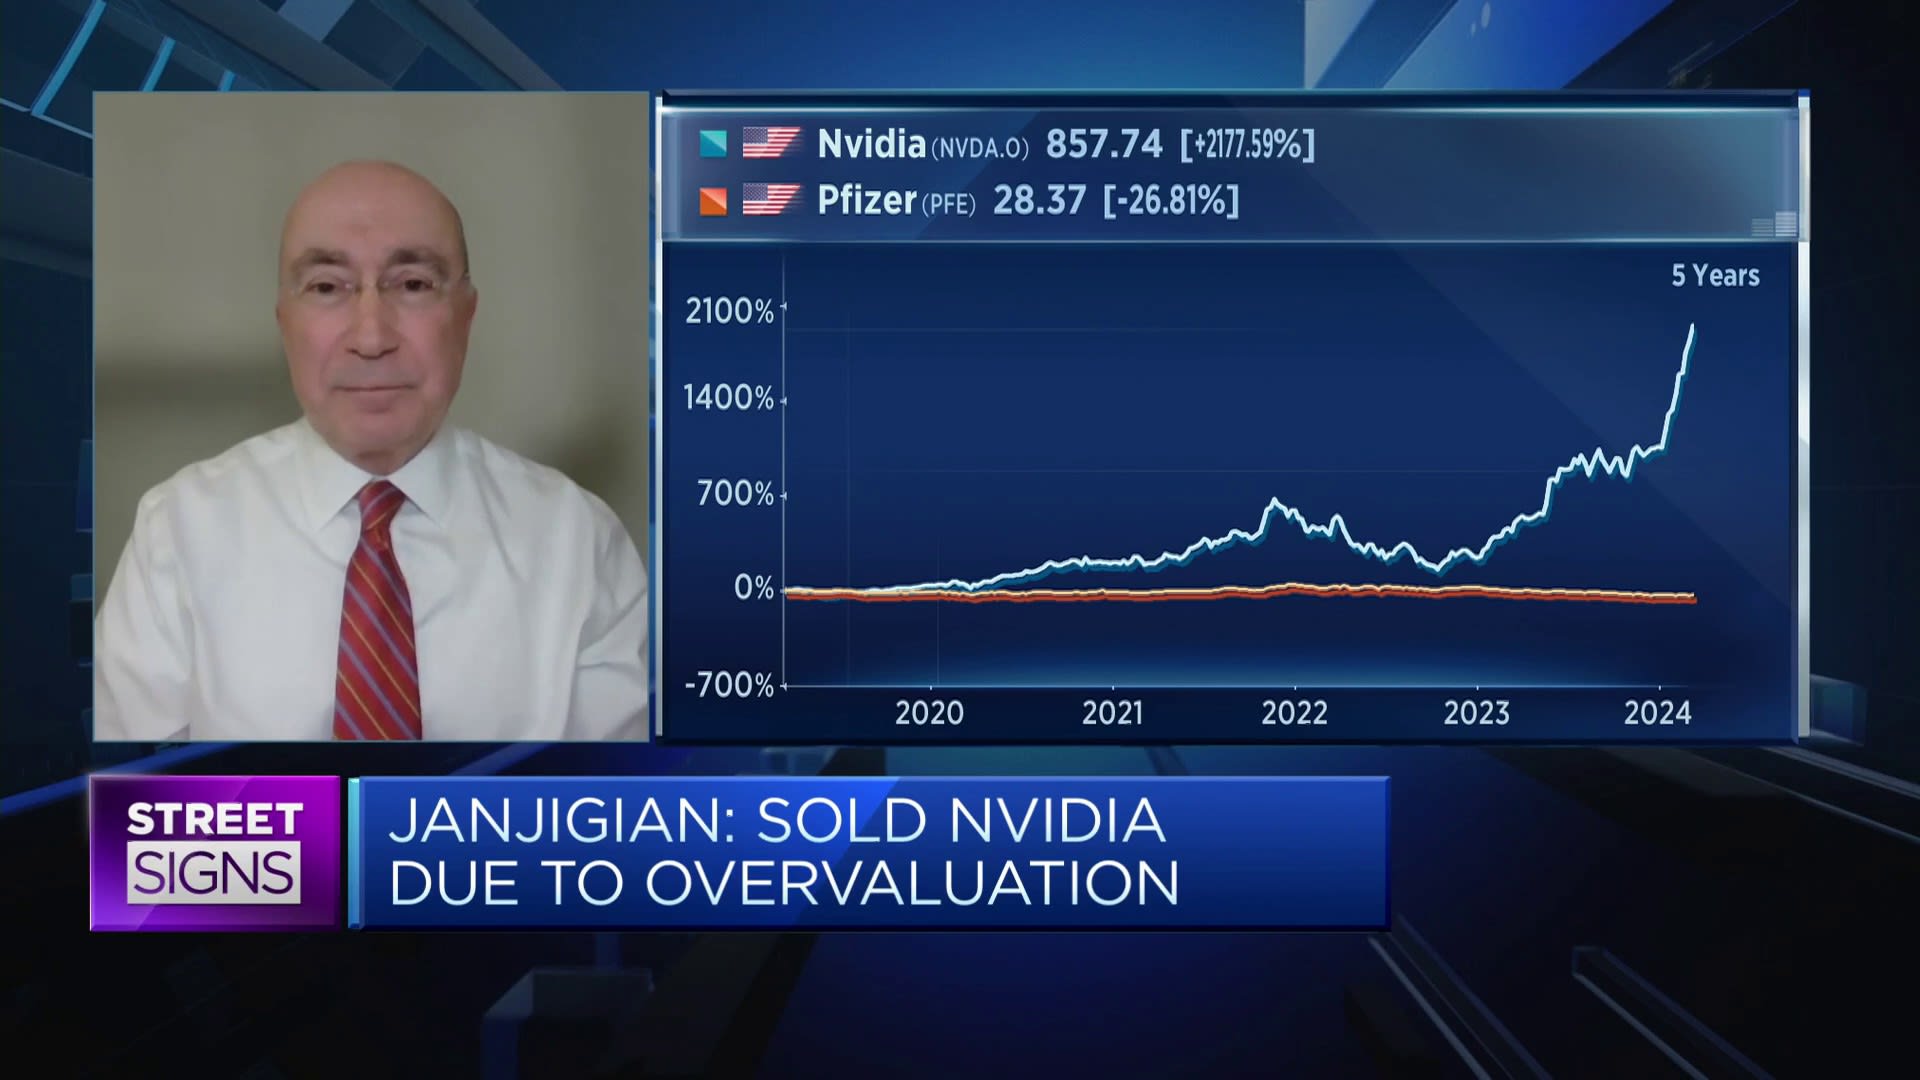 Here’s how this CIO is investing in Nvidia shares right now [Video]